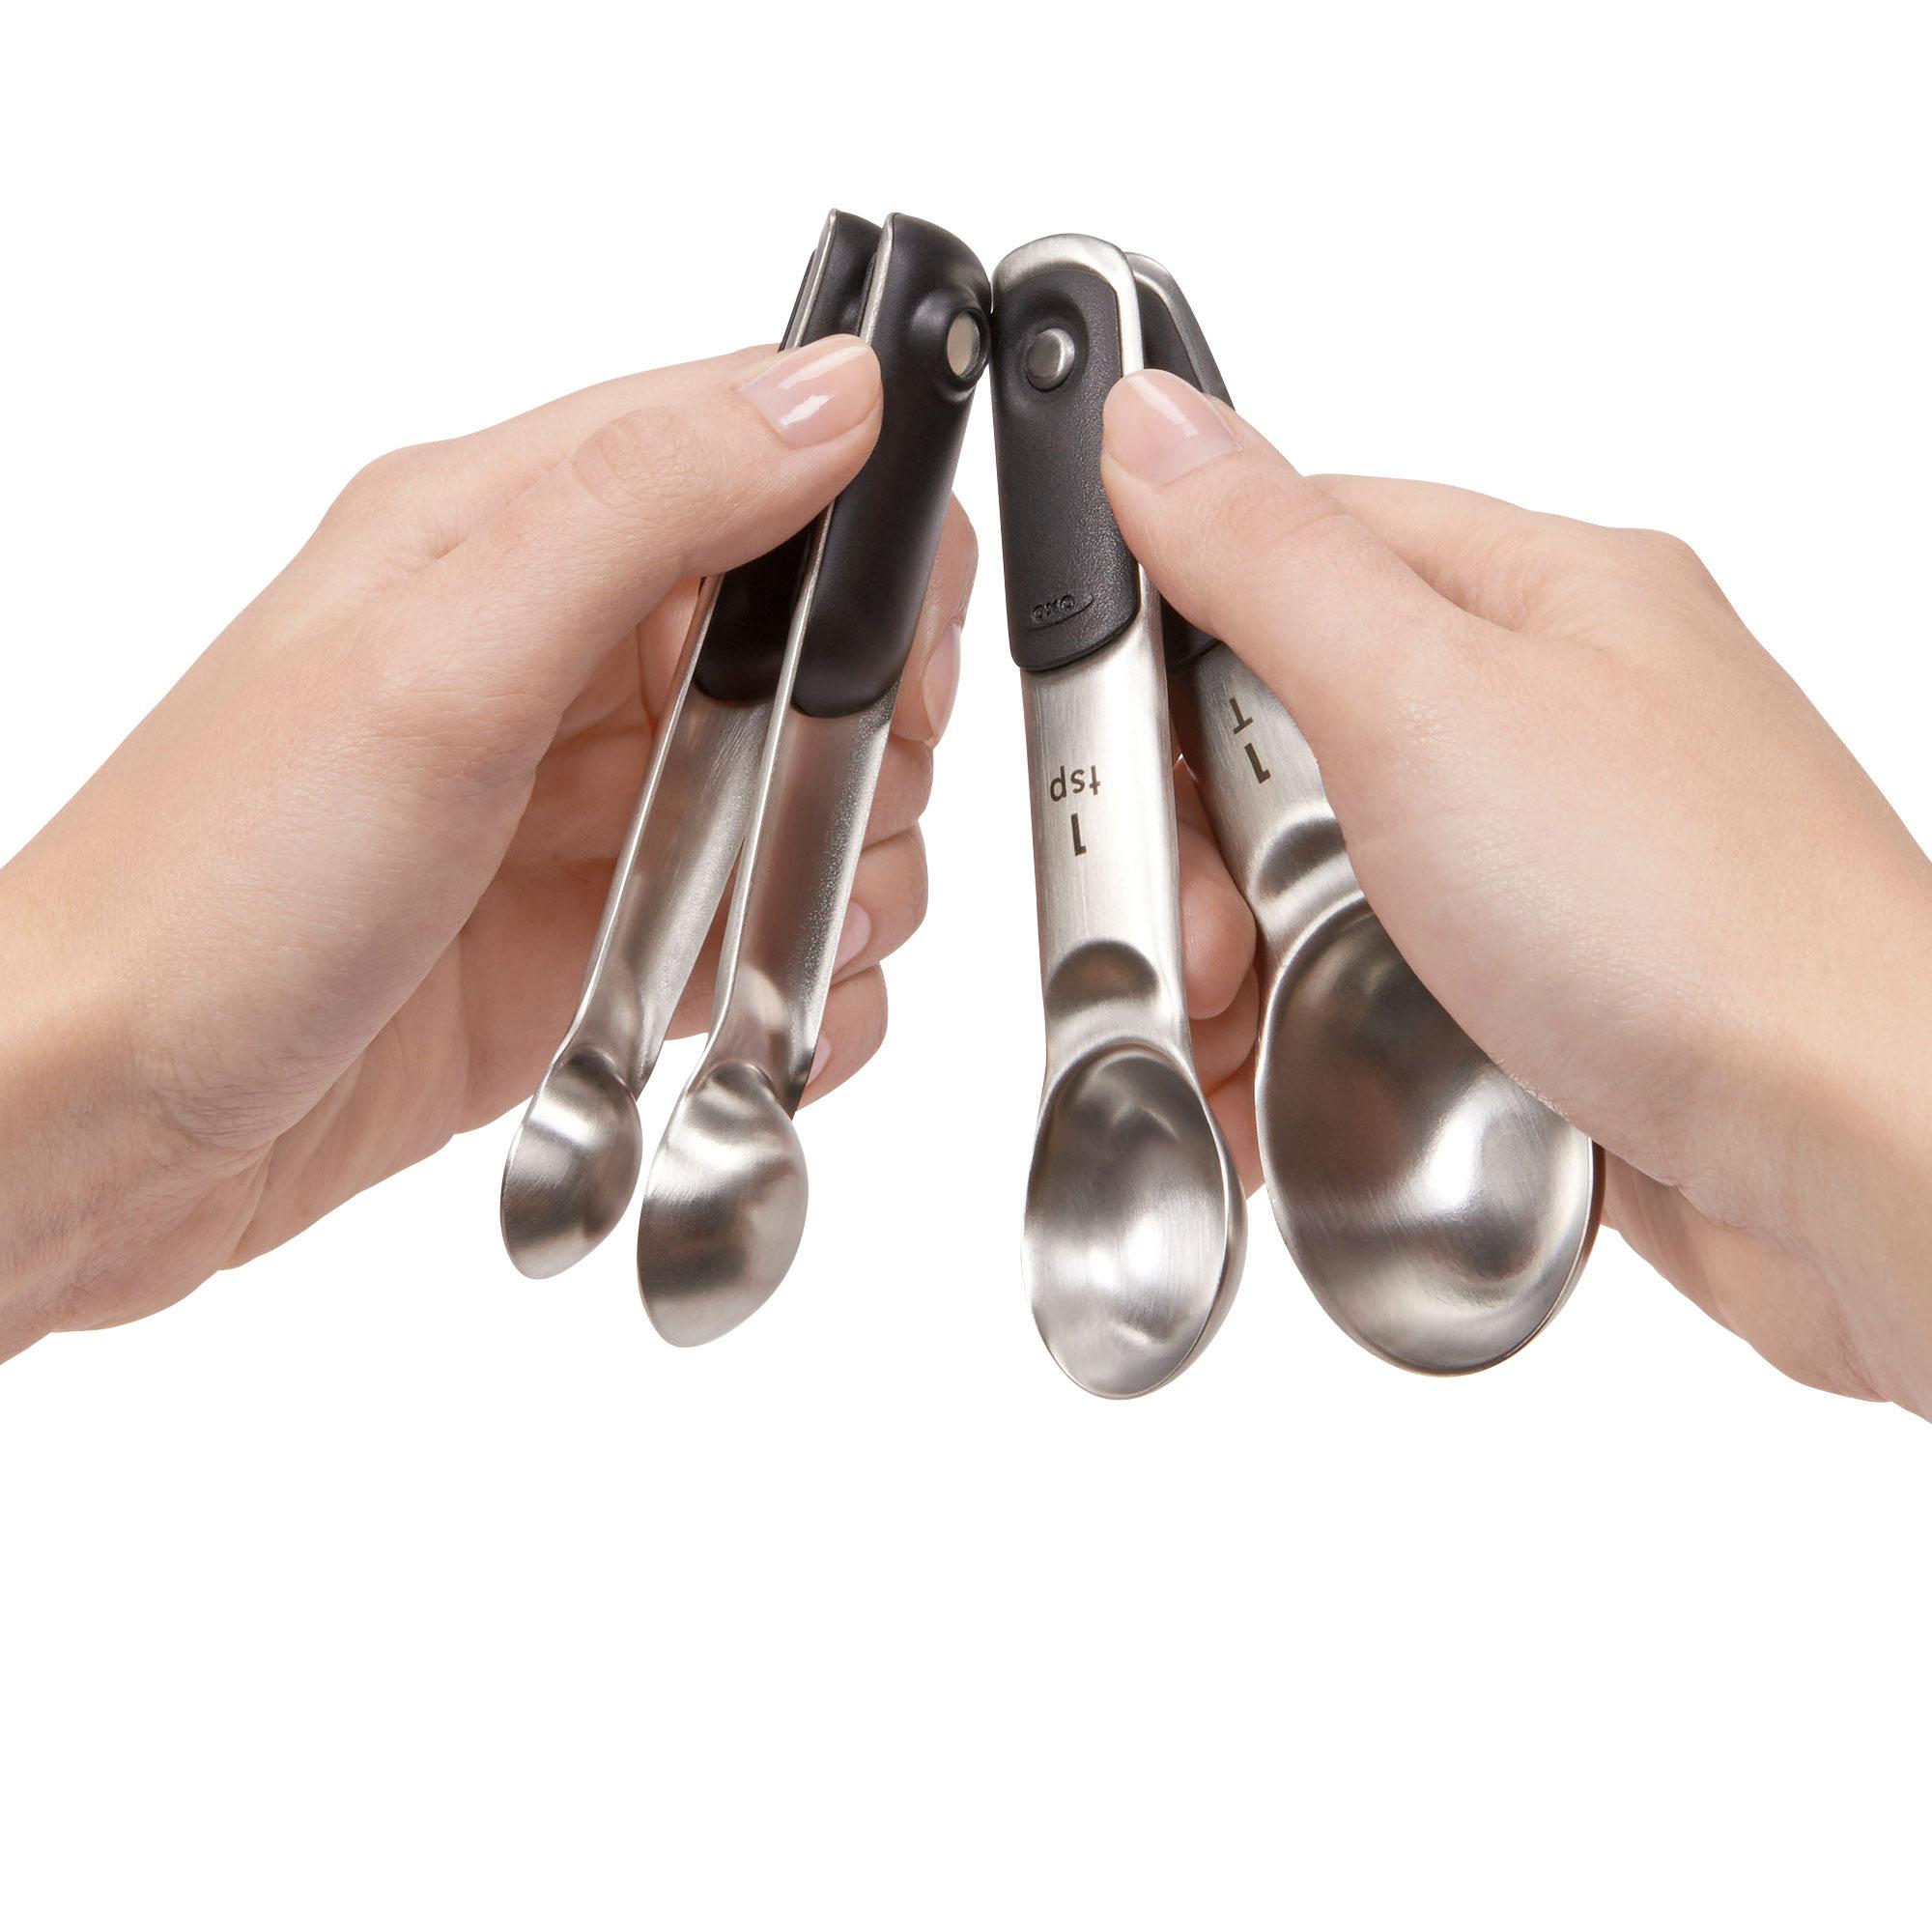 OXO Good Grips Stainless Steel Measuring Spoon Set 4pc Image 4